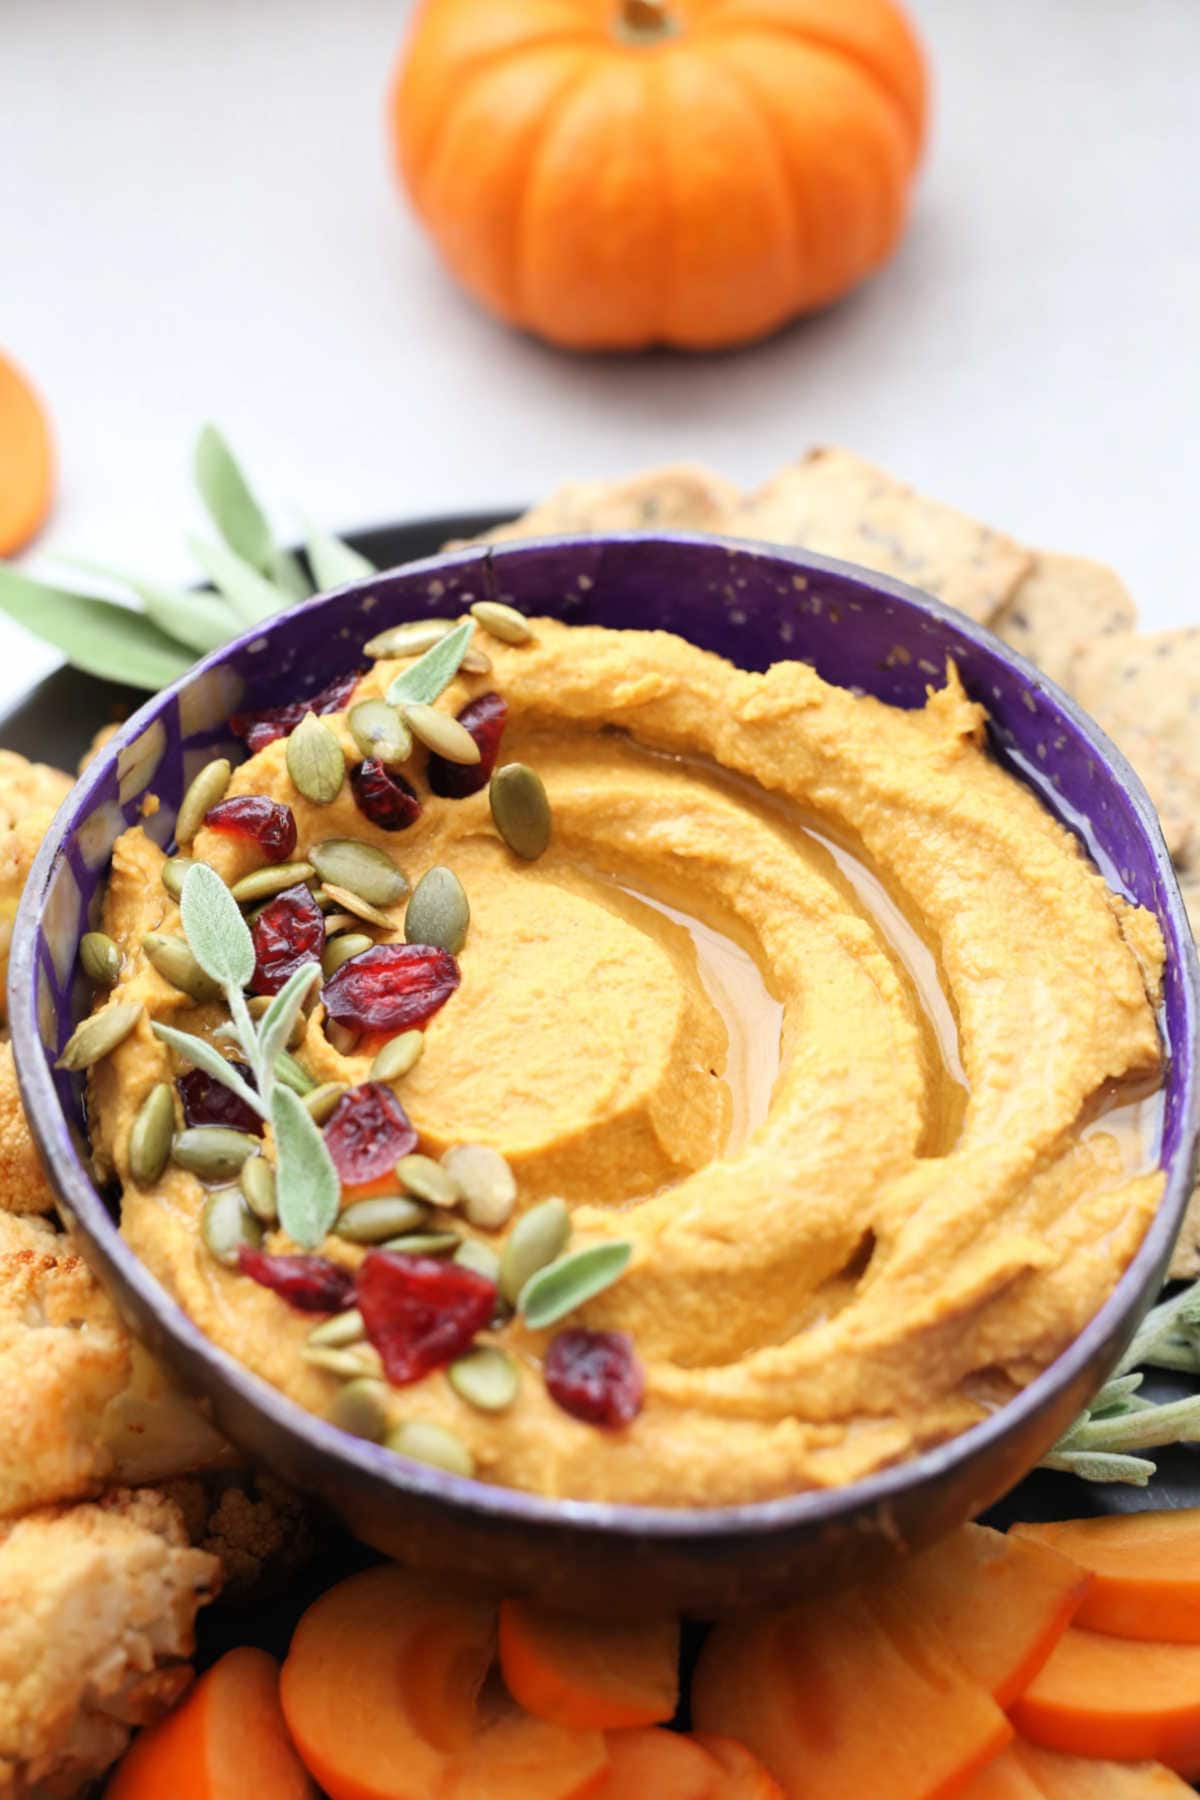 Pumpkin hummus fall appetizer recipe in a bowl topped with dried cranberries and pumpkin seeds.